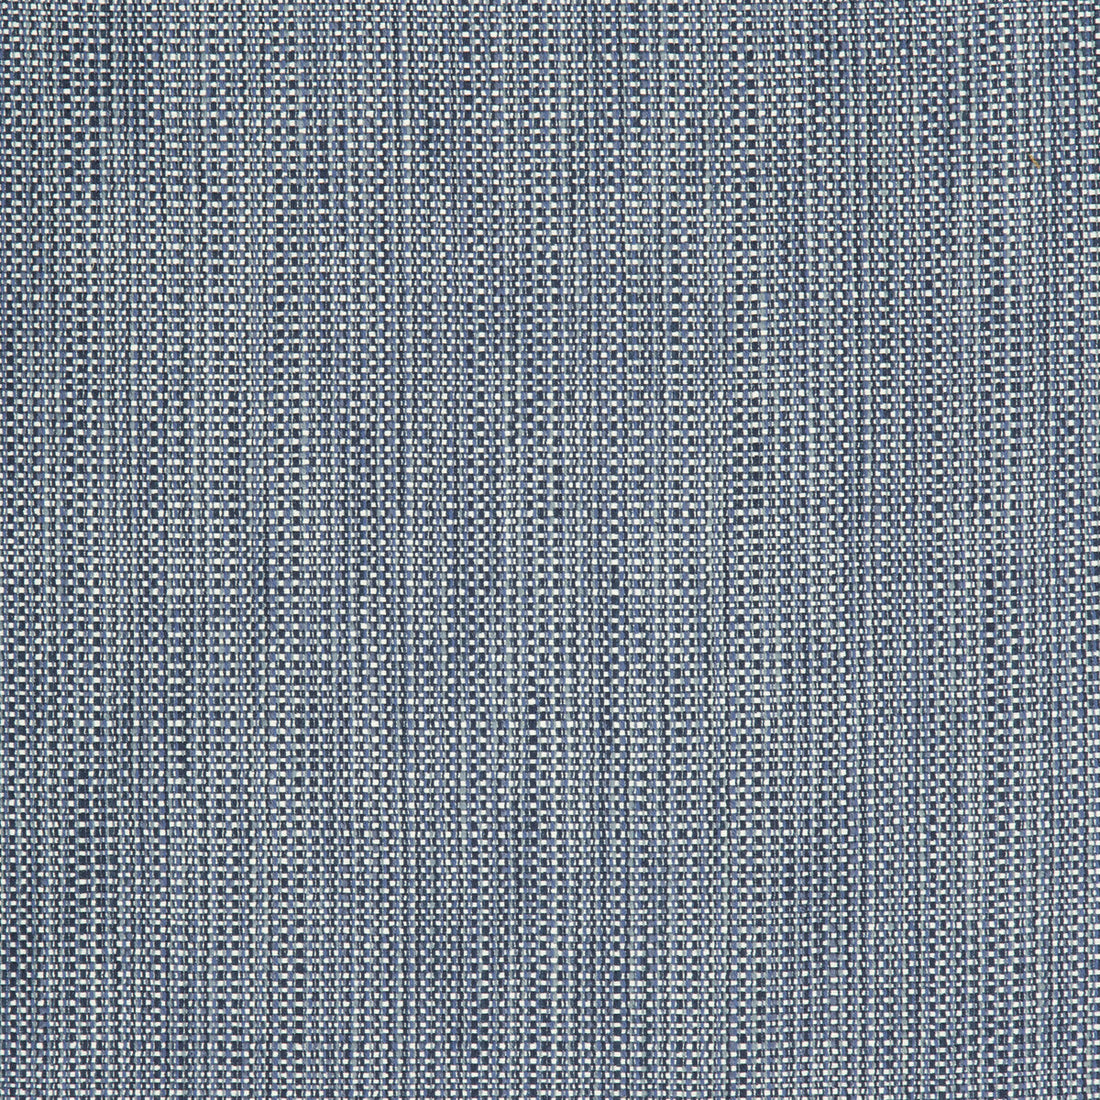 Kravet Contract fabric in 34634-50 color - pattern 34634.50.0 - by Kravet Contract in the Crypton Incase collection